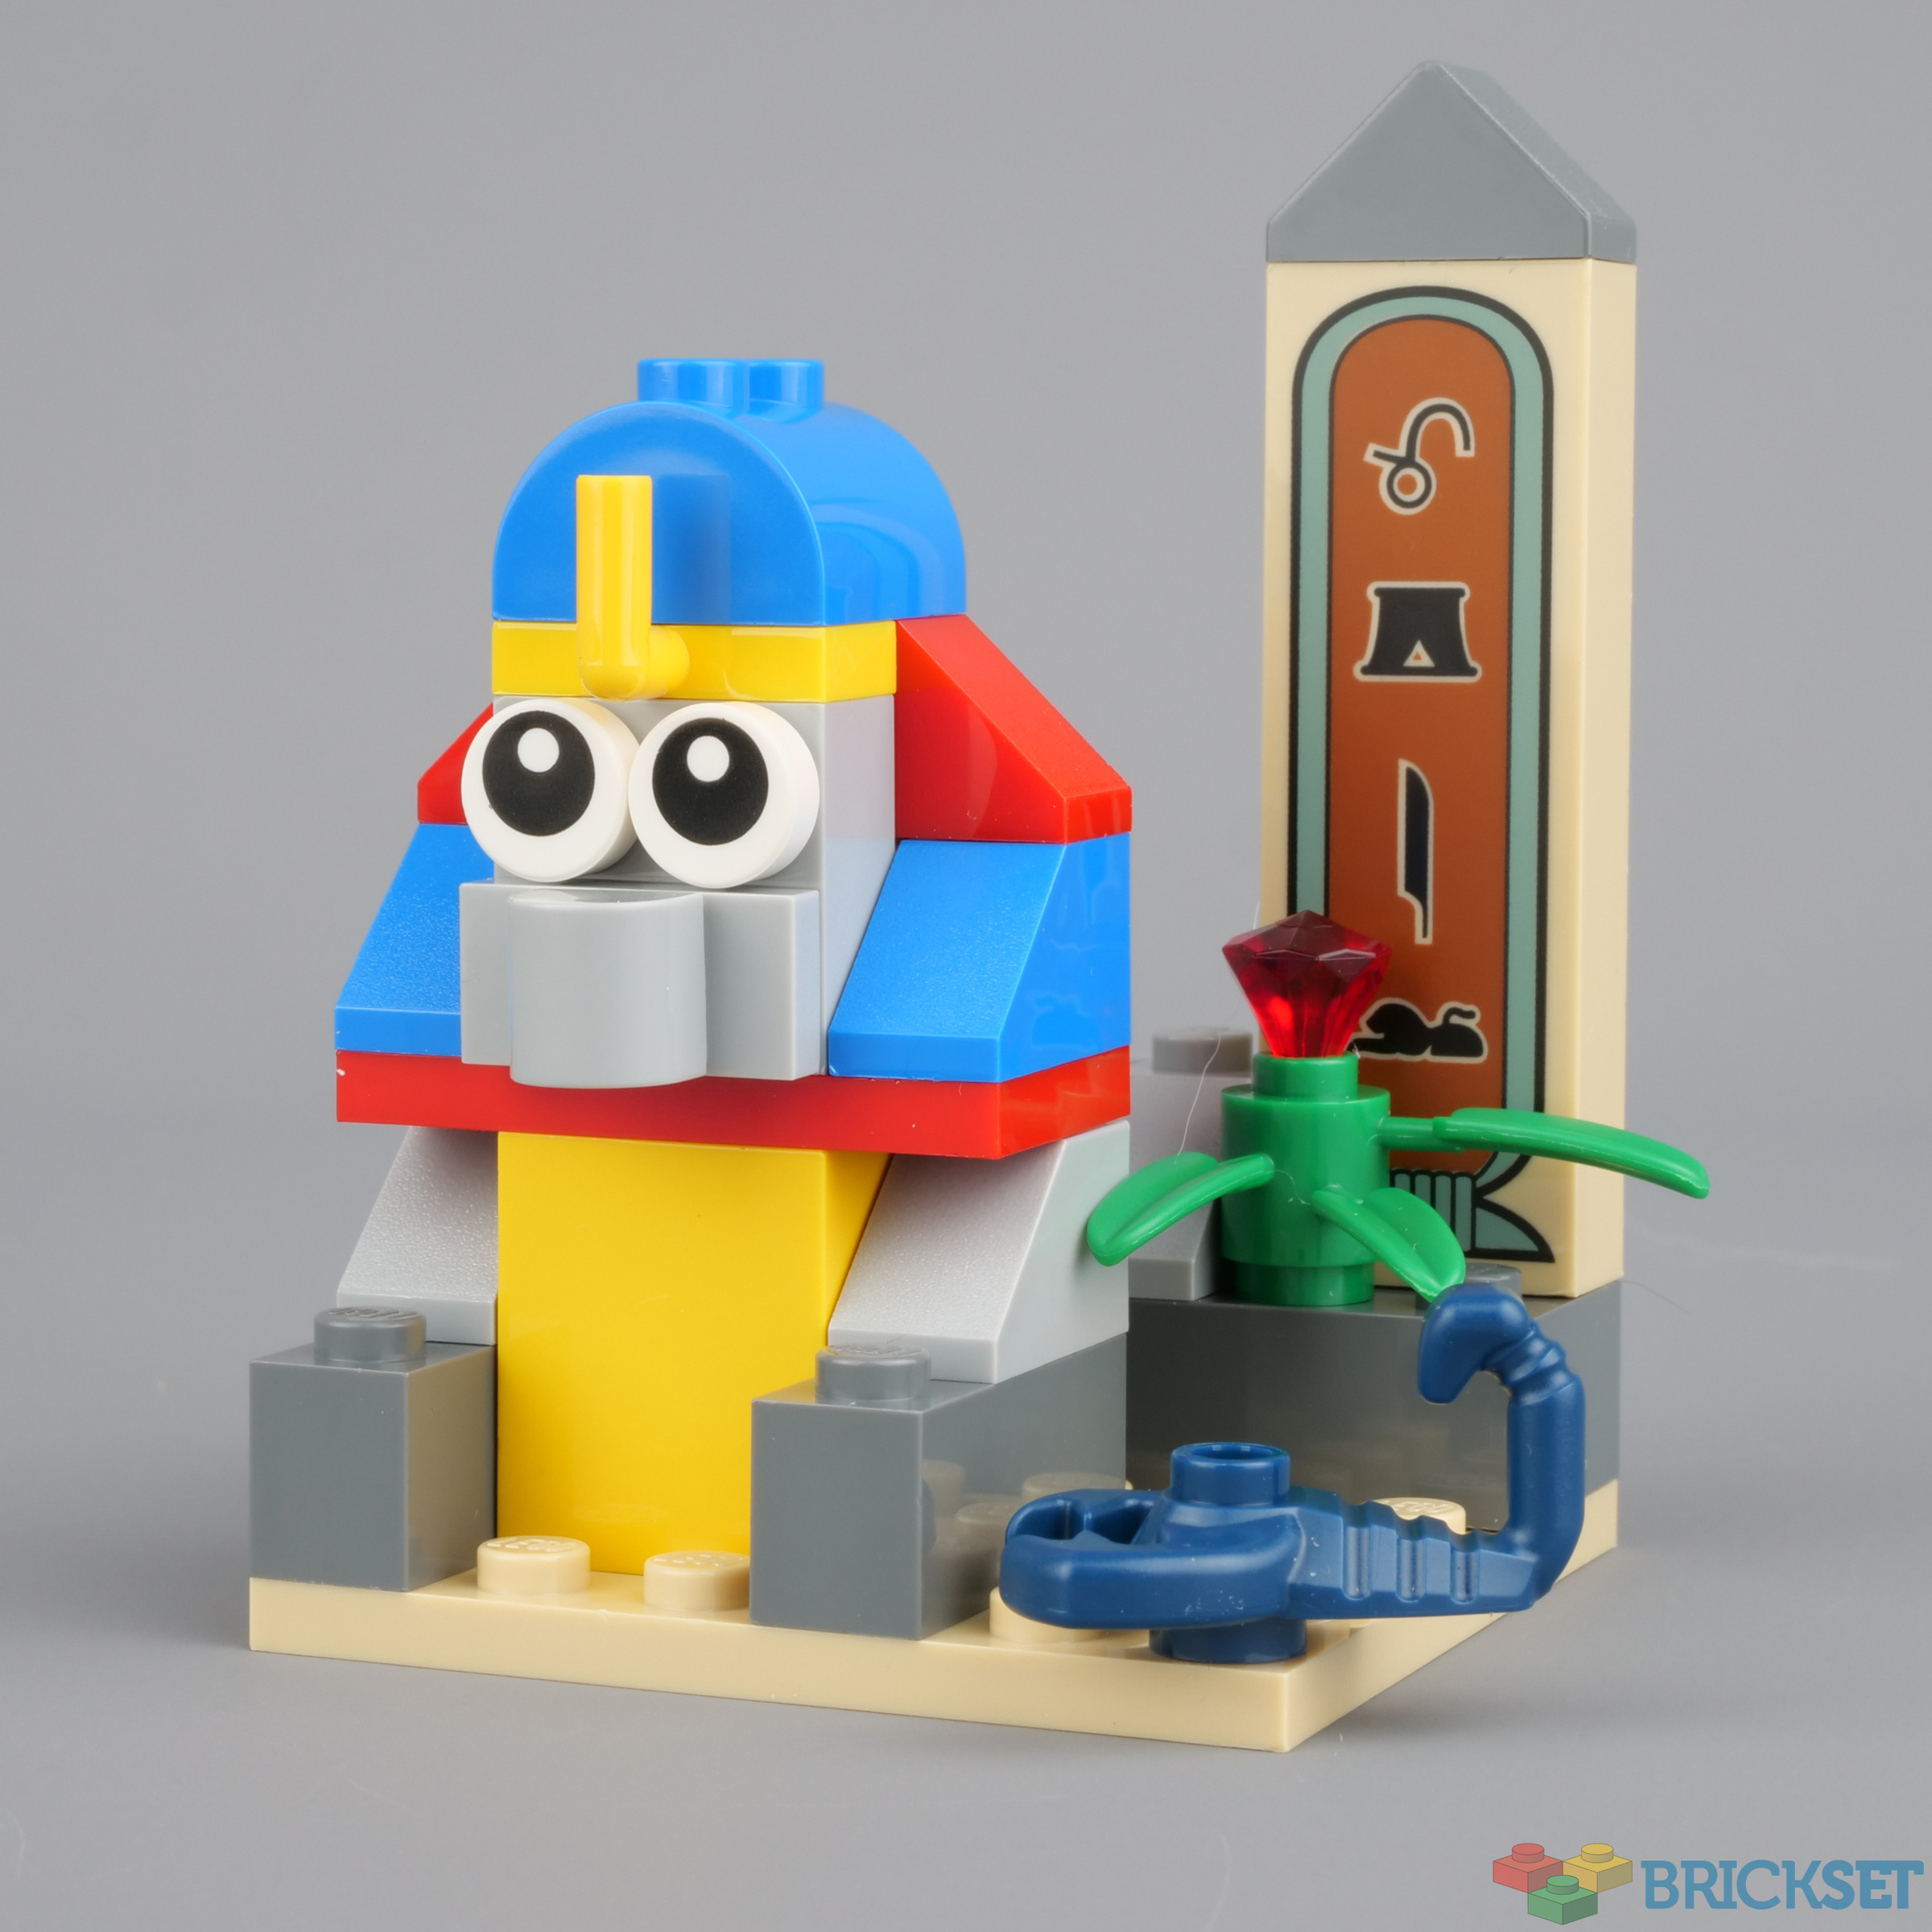 LEGO Classic 11021 90 Years of Play full review and gallery